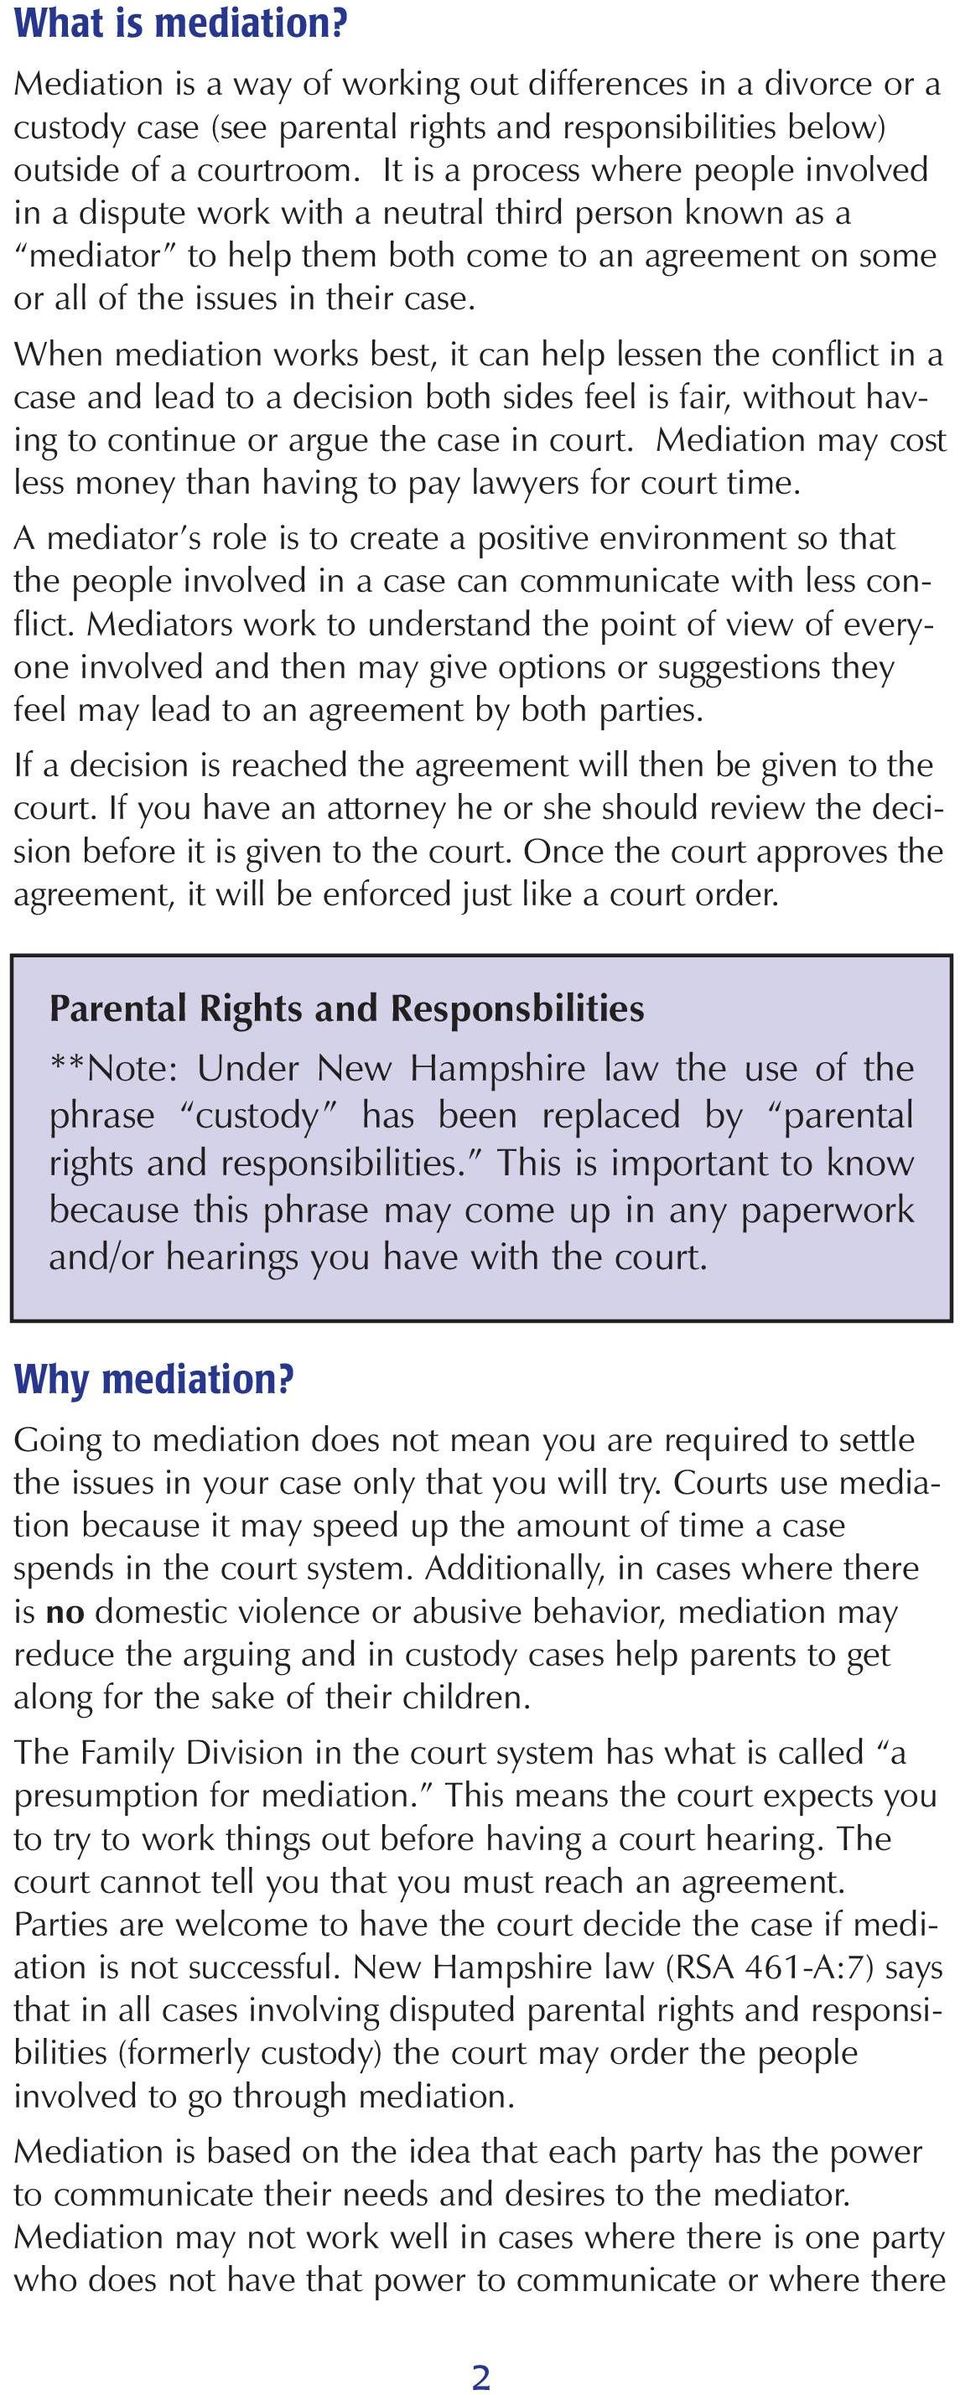 When mediation works best, it can help lessen the conflict in a case and lead to a decision both sides feel is fair, without having to continue or argue the case in court.